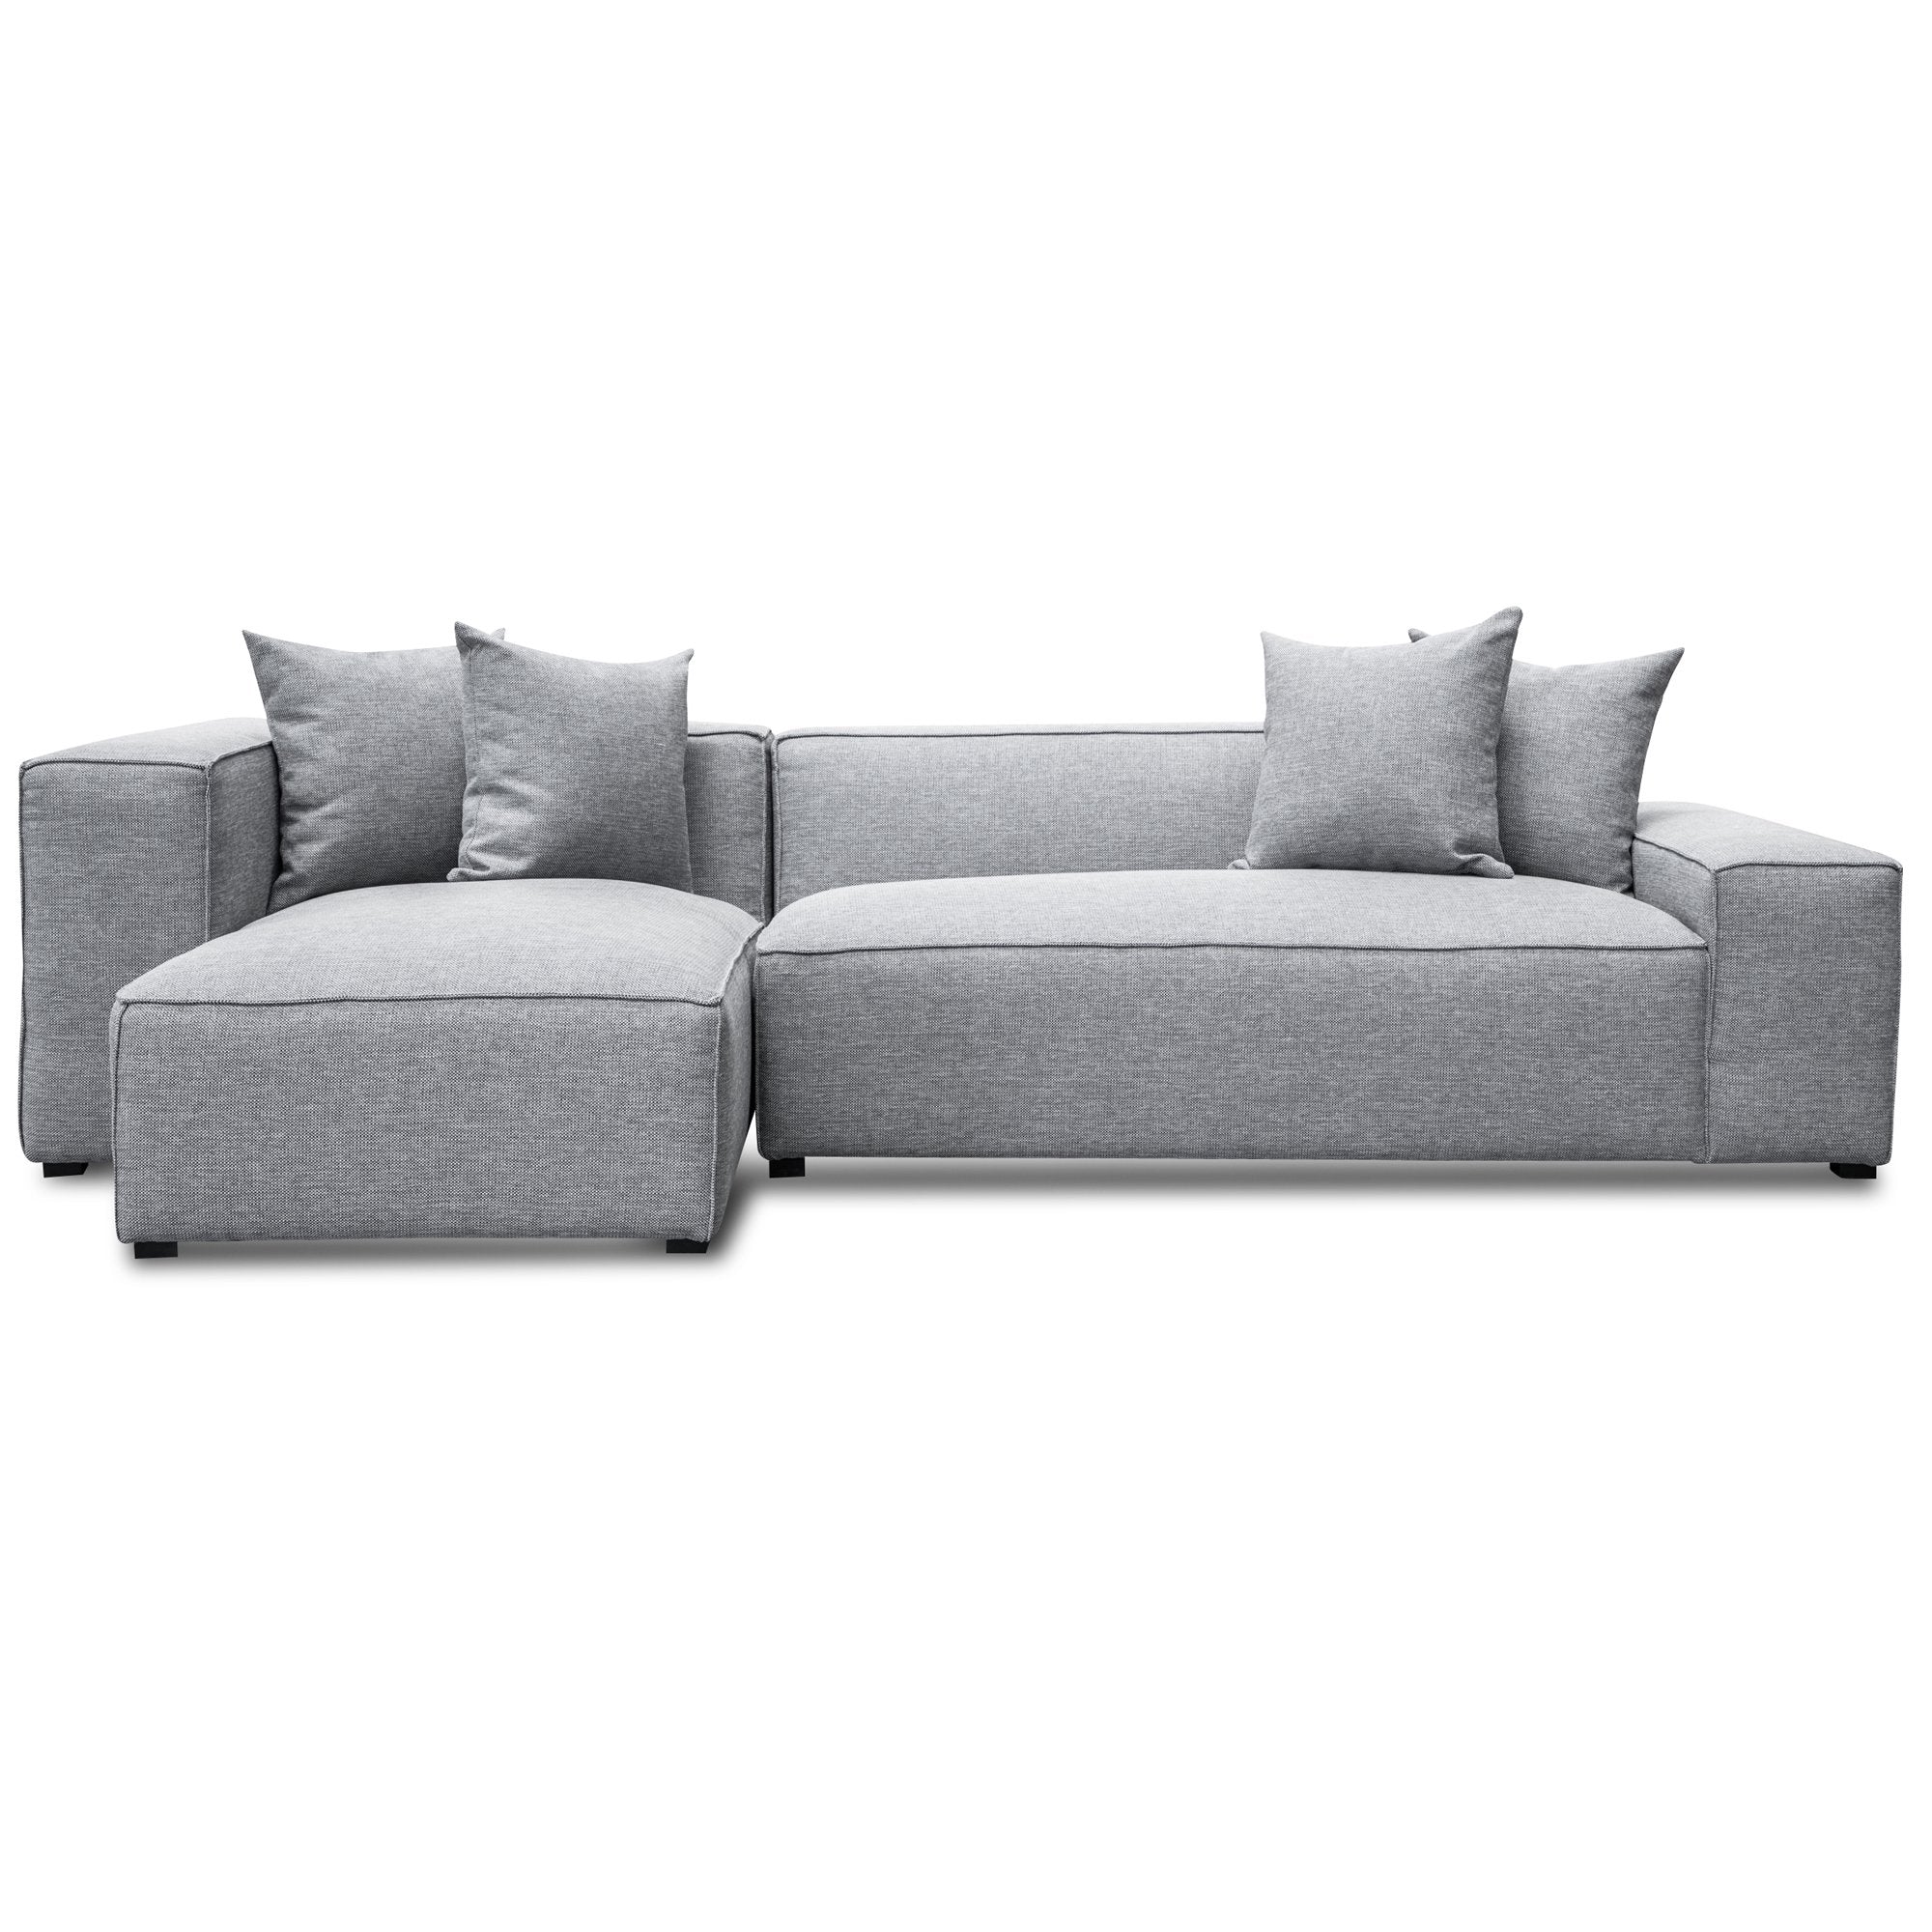 Charles 3S Left Chaise Sofa - Coin Grey - Sofas